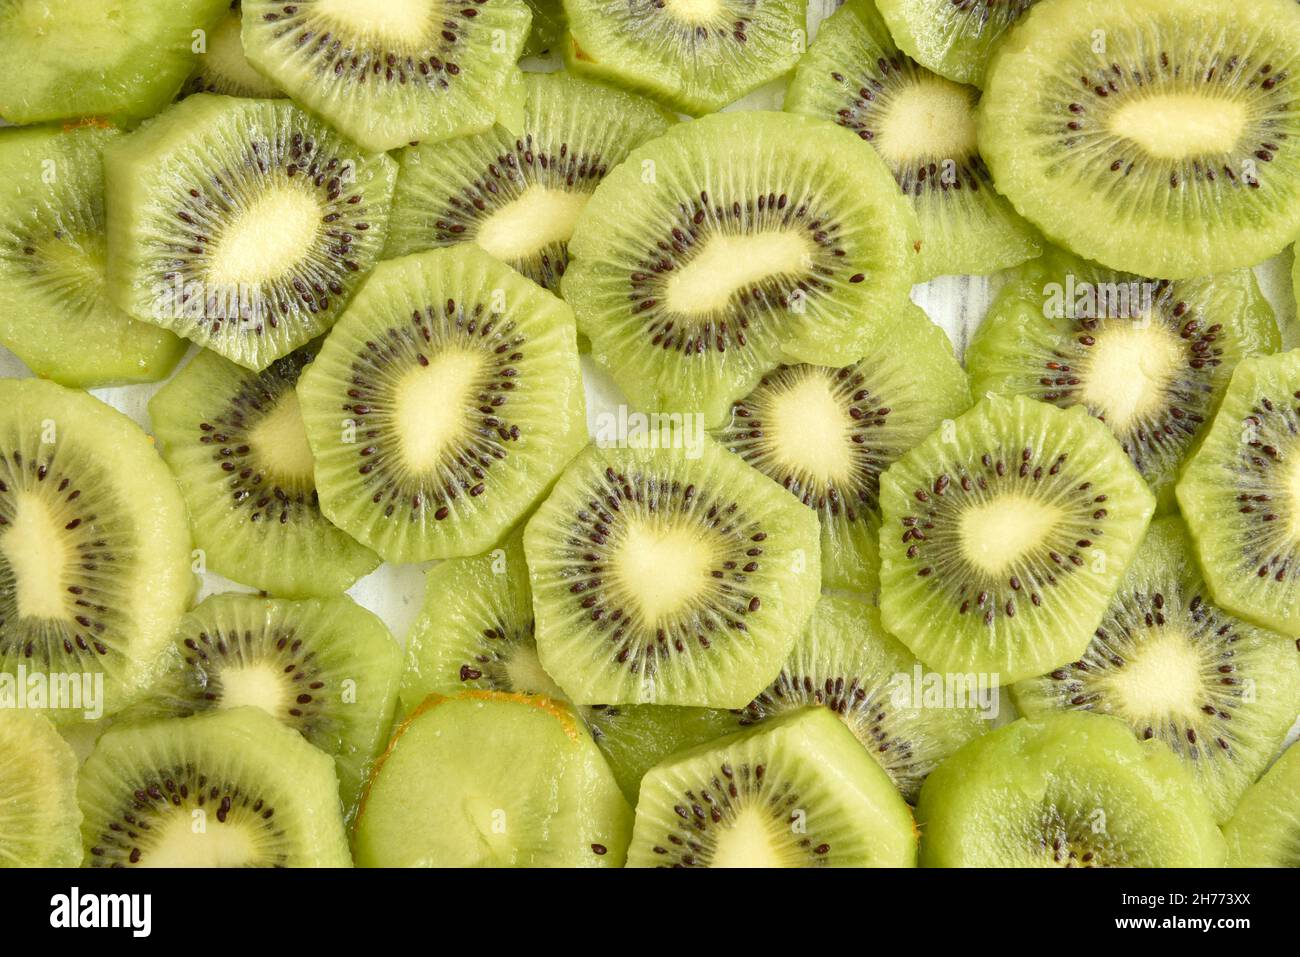 Overhead view of kiwi slices on a table Stock Photo